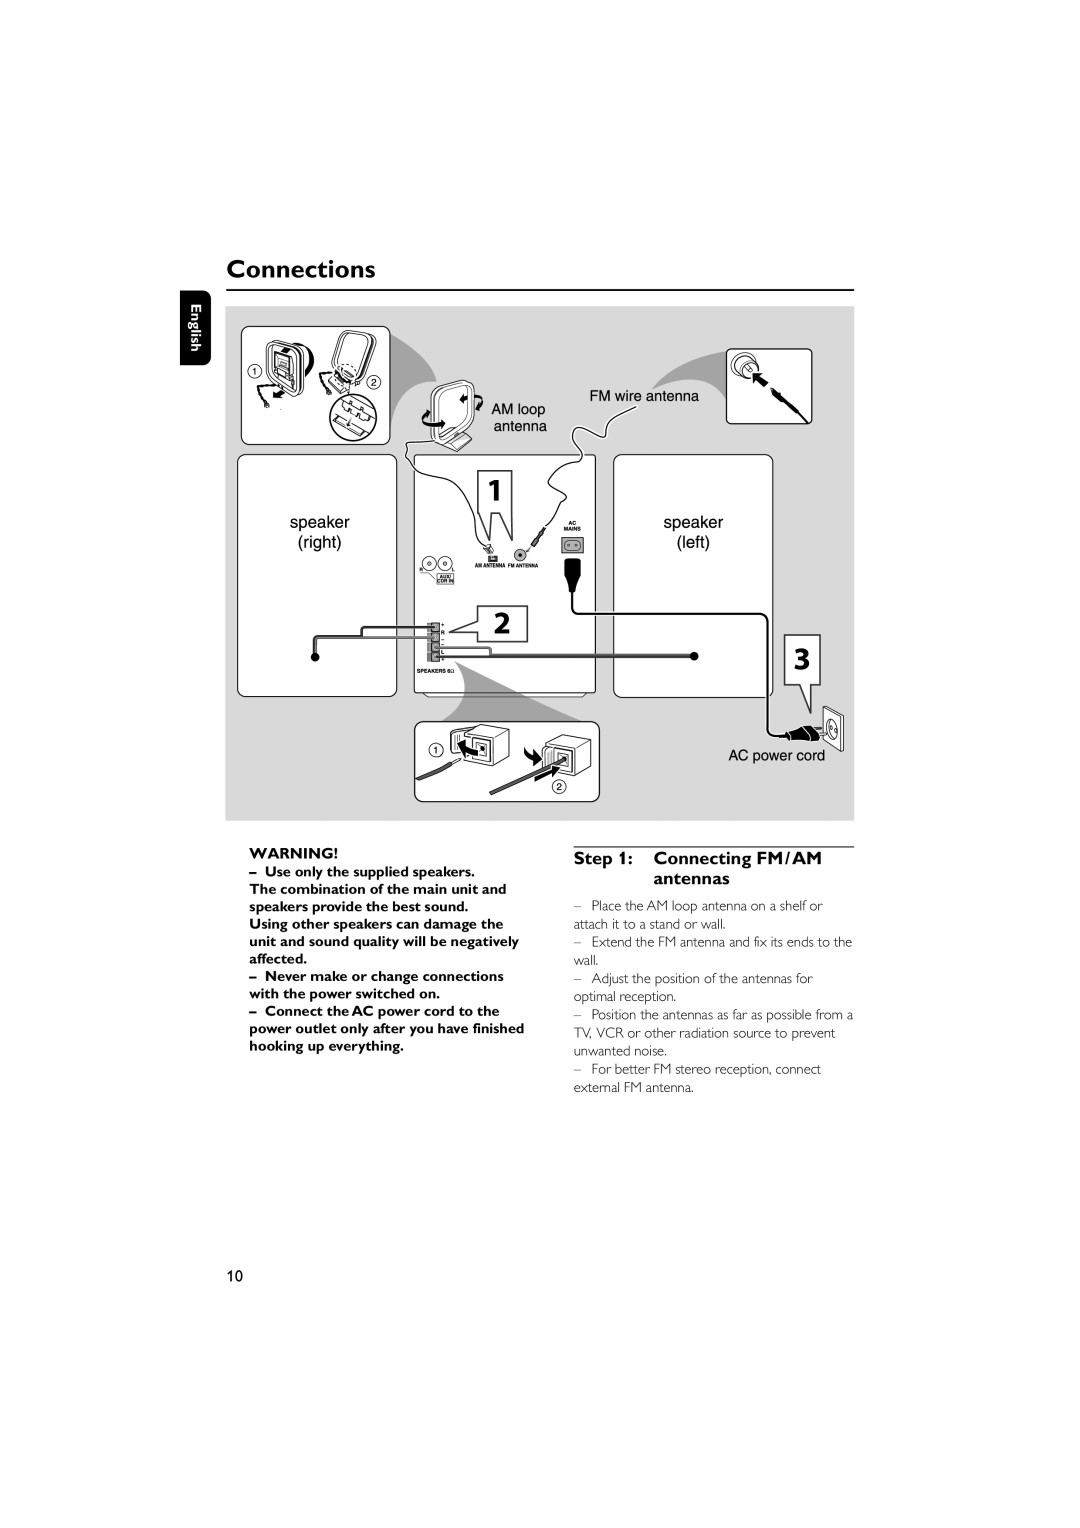 Philips MCM5 user manual Connections, Connecting FM/AM antennas, English 